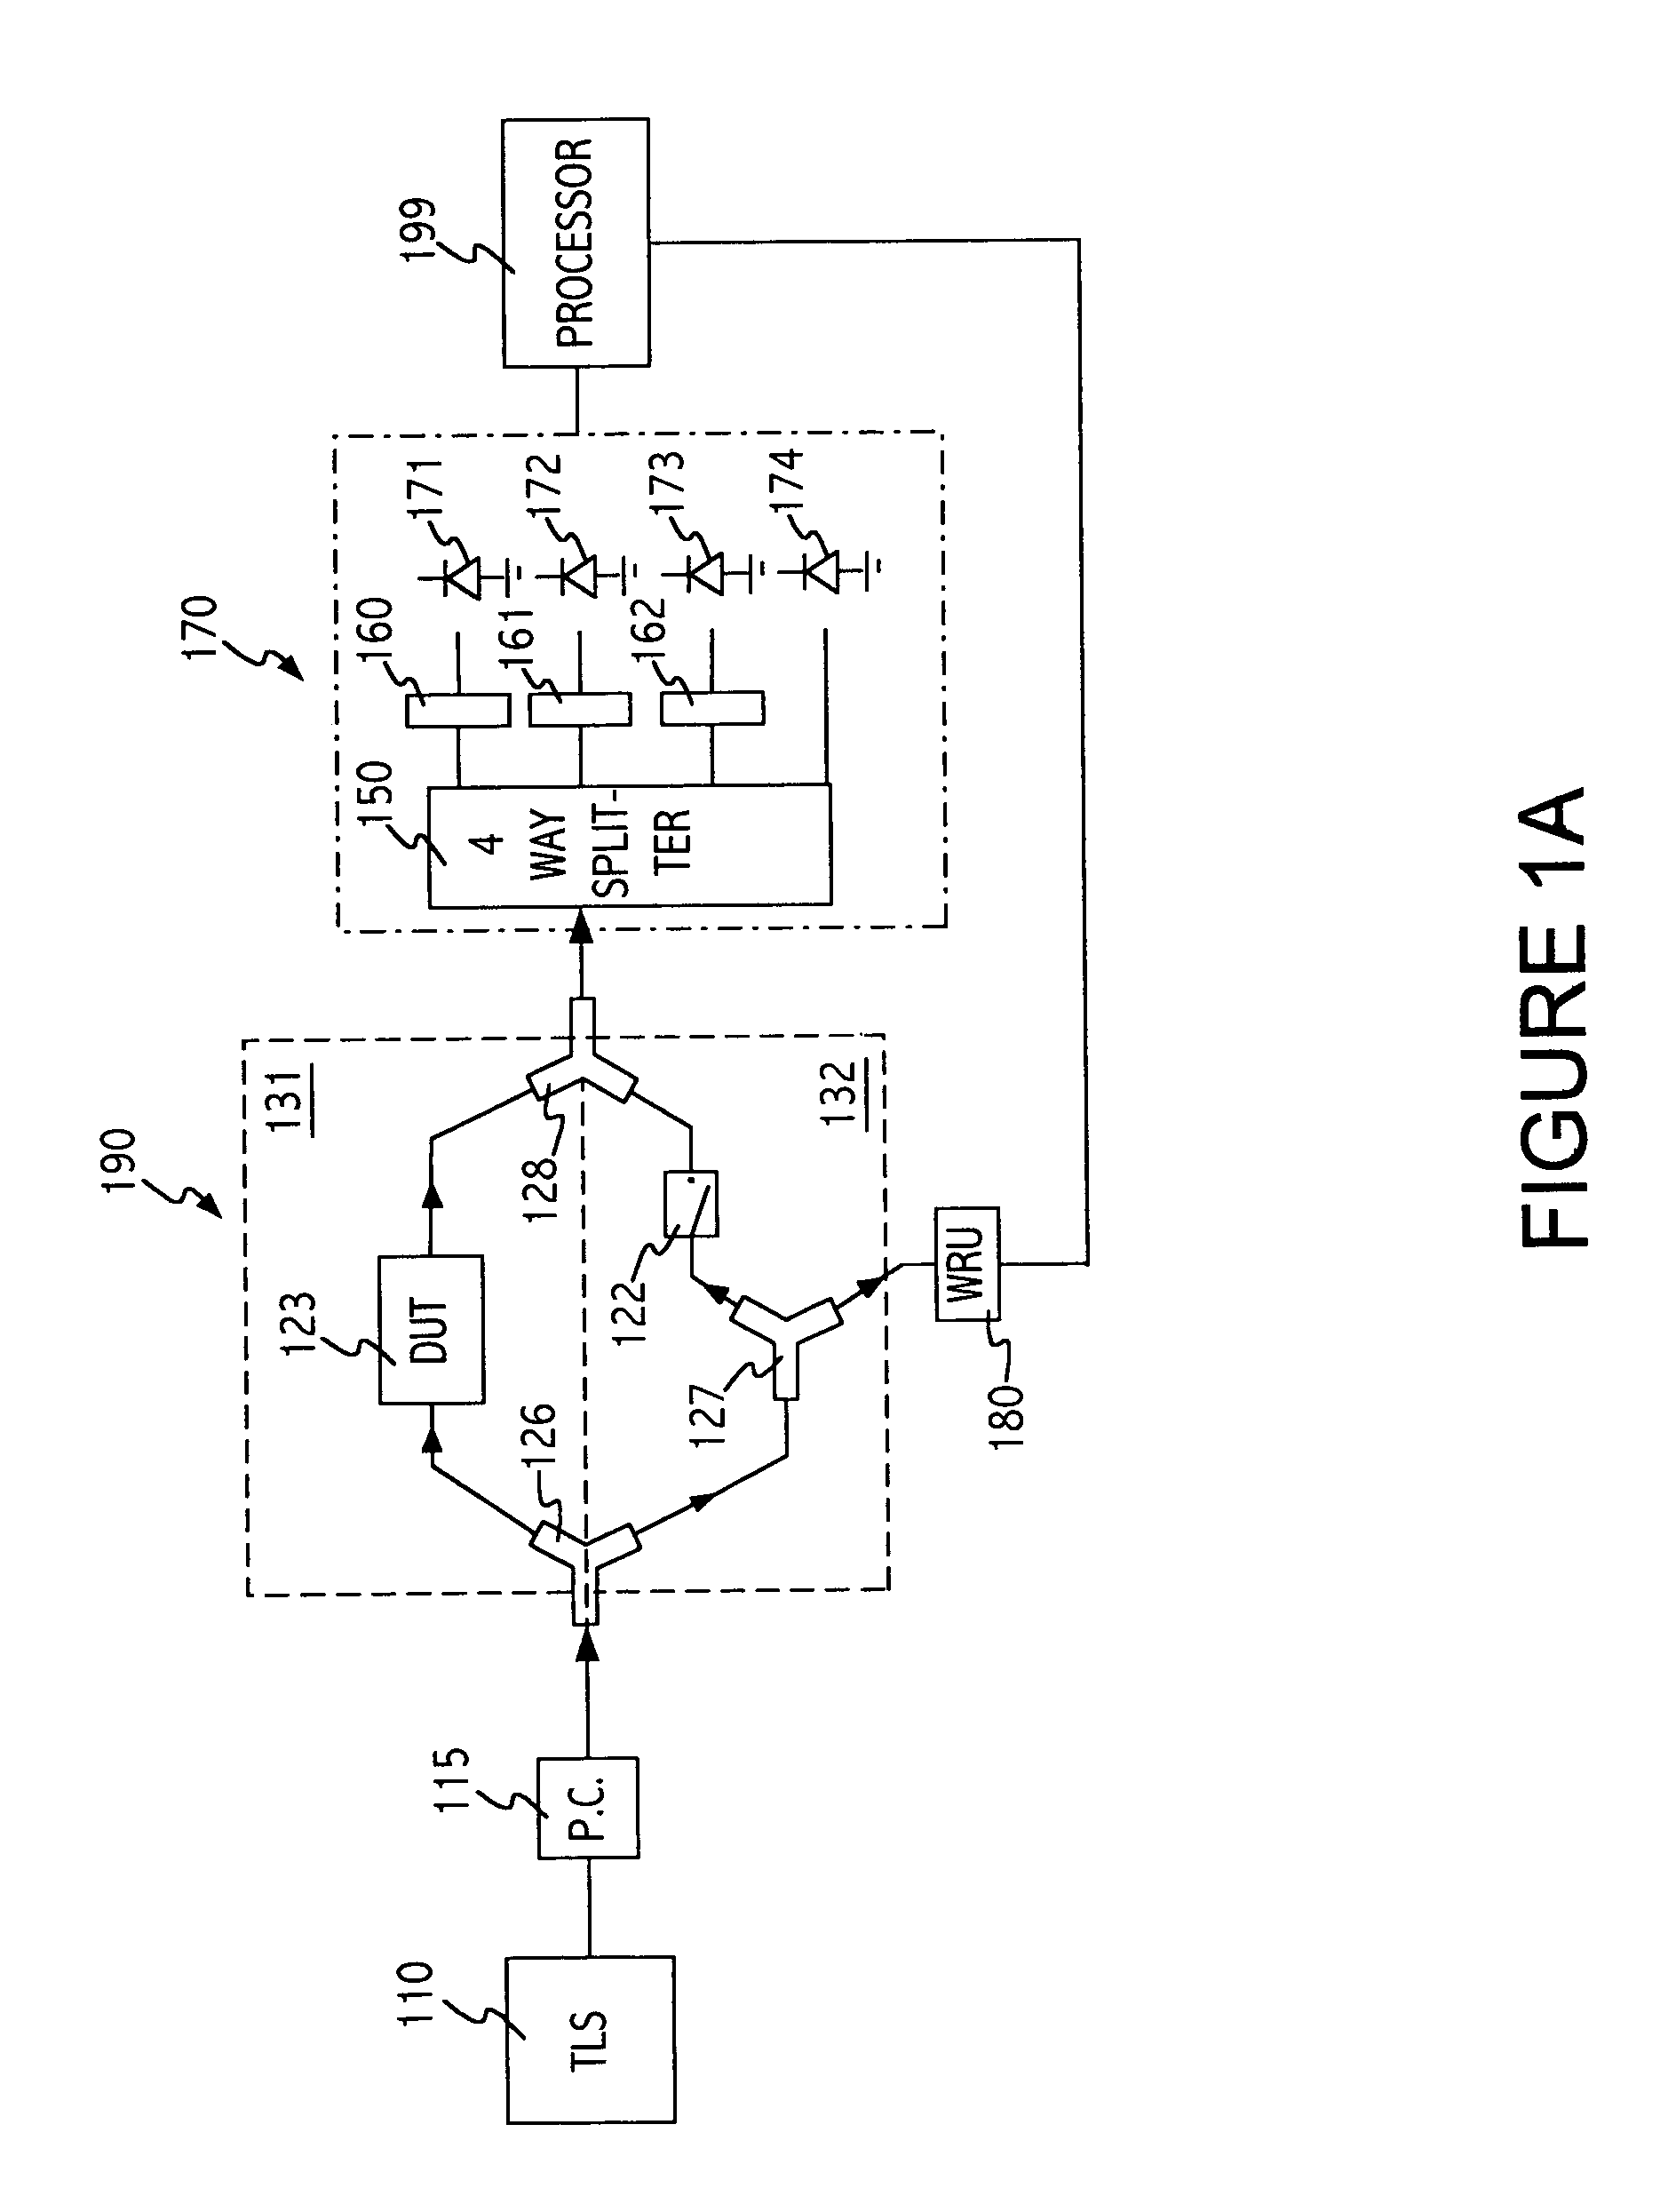 System and method for removing the relative phase uncertainty in device characterizations performed with a polarimeter